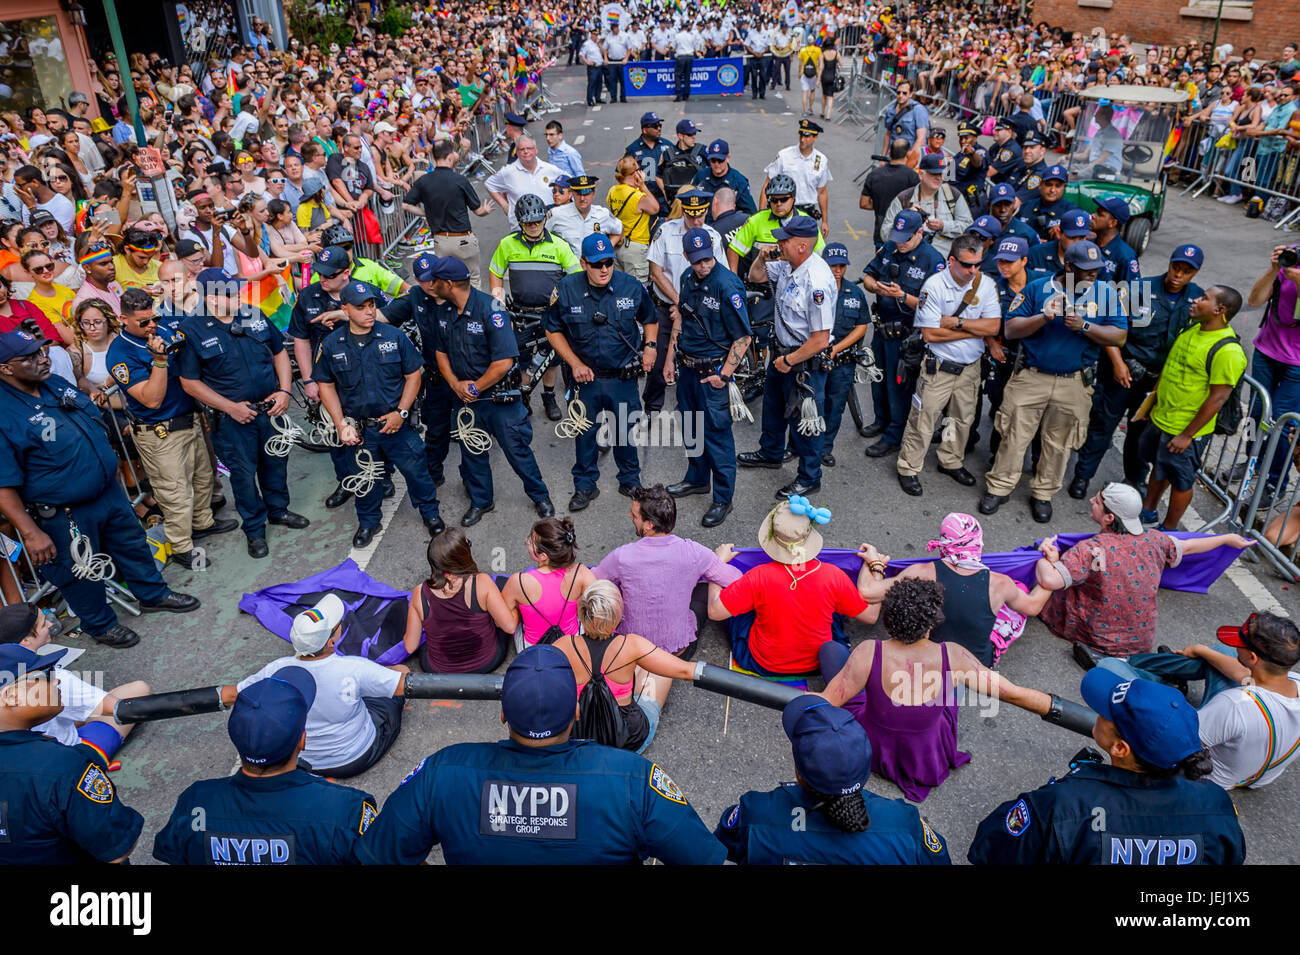 New York, United States. 25th June, 2017. Queer and trans allies, part of the No Justice No Pride movement blocked the NYPD and Toronto Police contingents at the New York City Pride March in pride for Trans and Queer lives. Protesters chained themselves to one another bringing the march to a complete halt. Twelve arrests were made co-facilitated by the Pride March board of directors for blocking police presence out of pride. Credit: Erik McGregor/Pacific Press/Alamy Live News Stock Photo